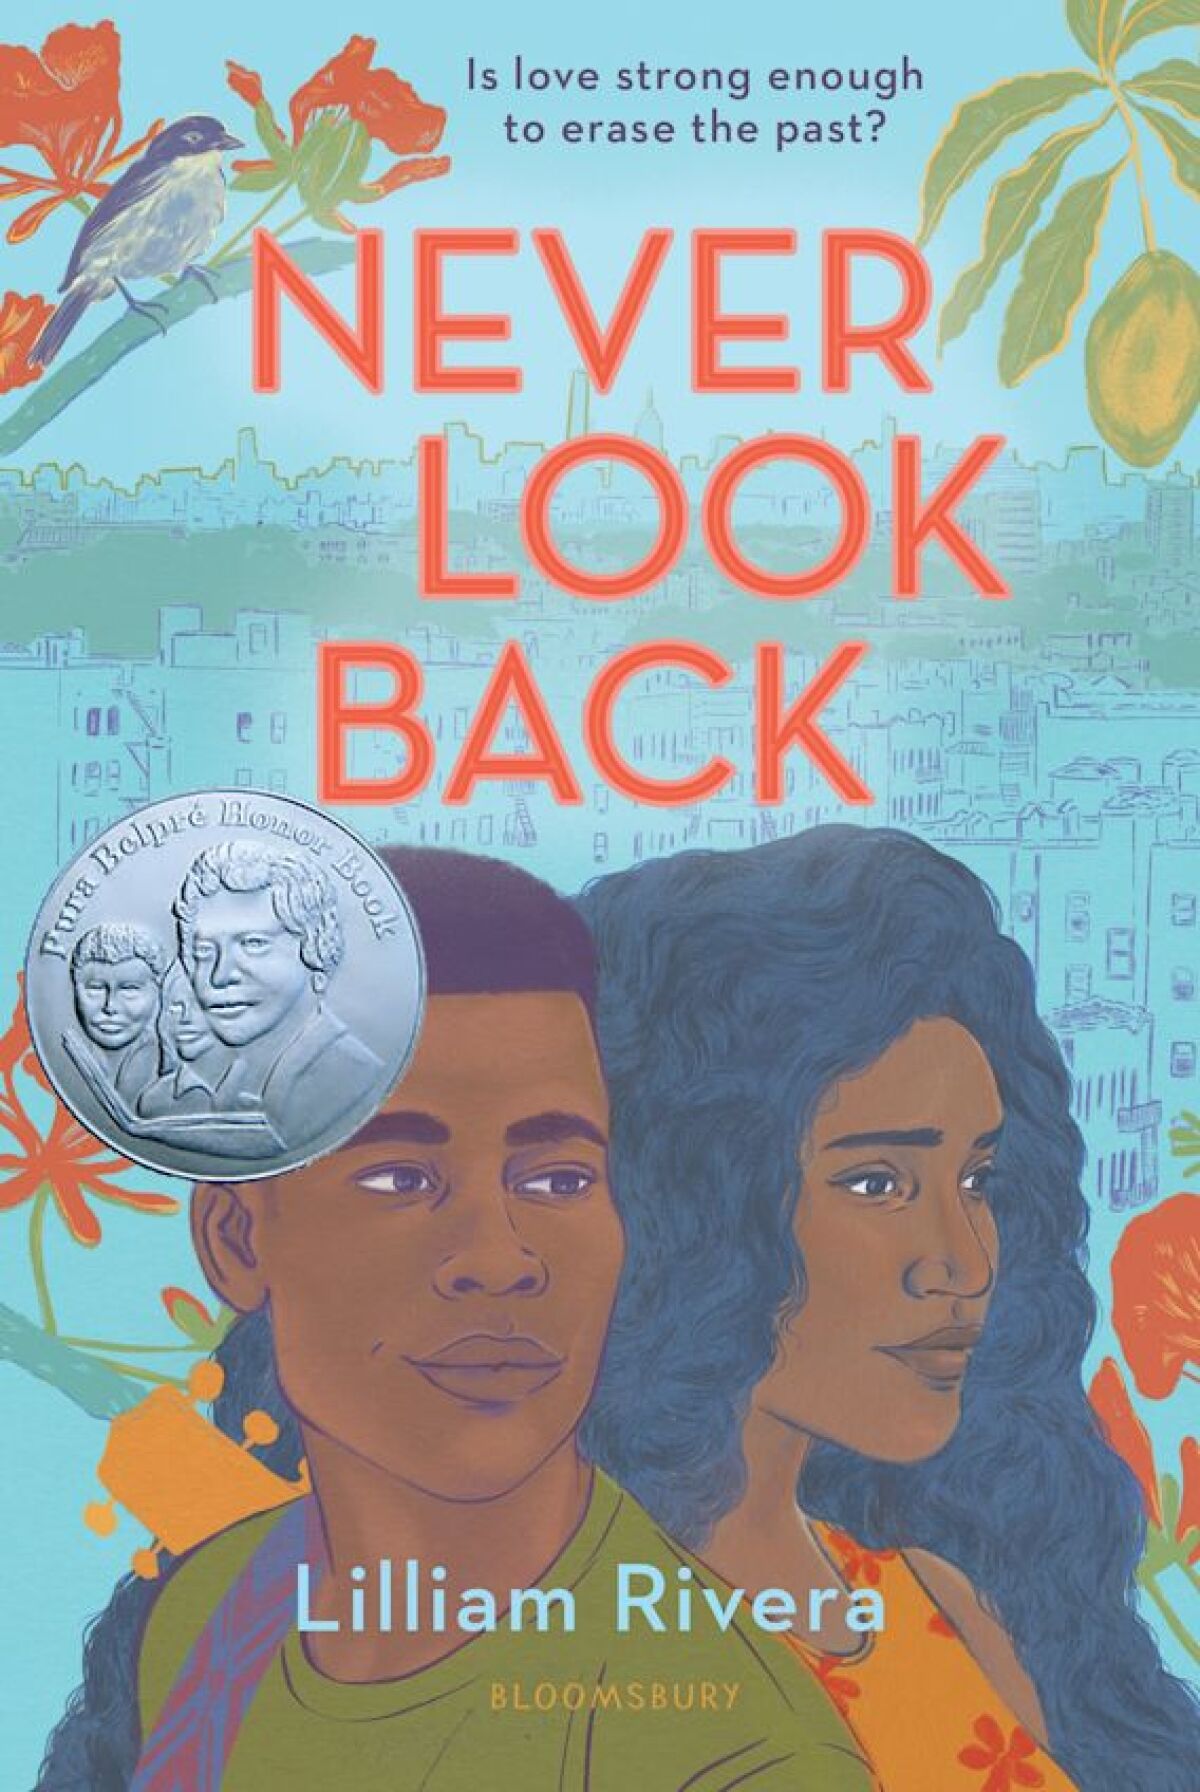 "Never Look Back" by Lilliam Rivera